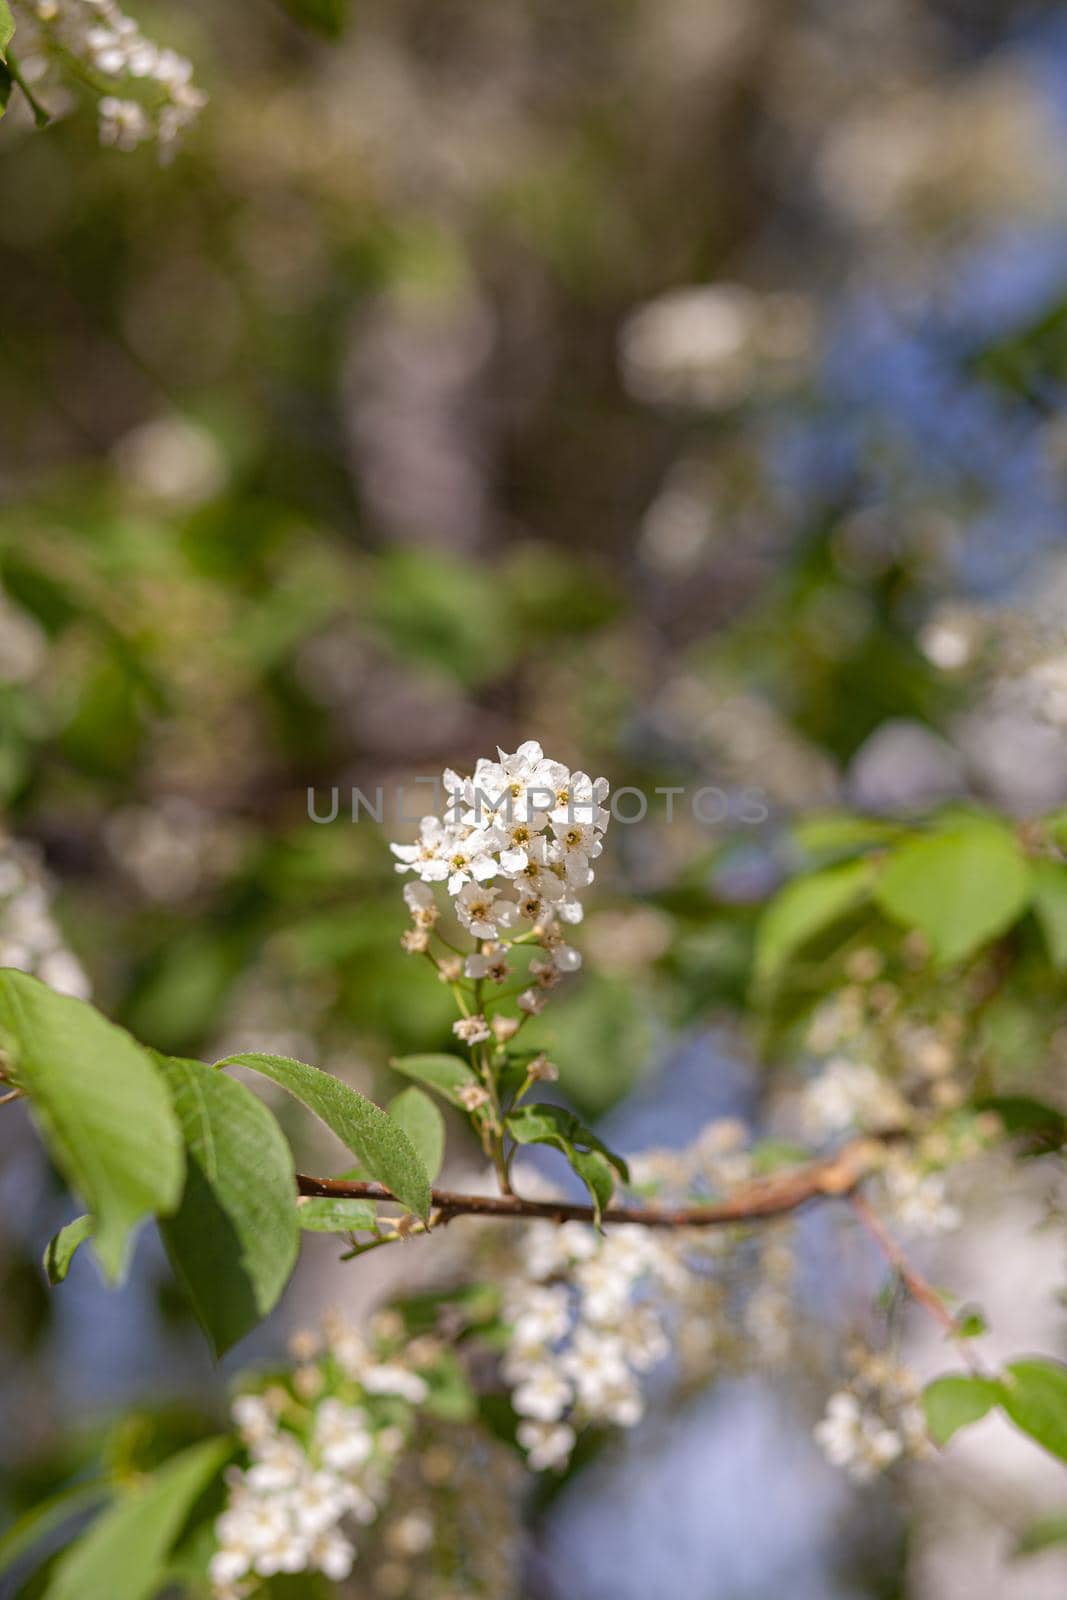 bird cherry blossom branch on abstract blurred background. by AnatoliiFoto